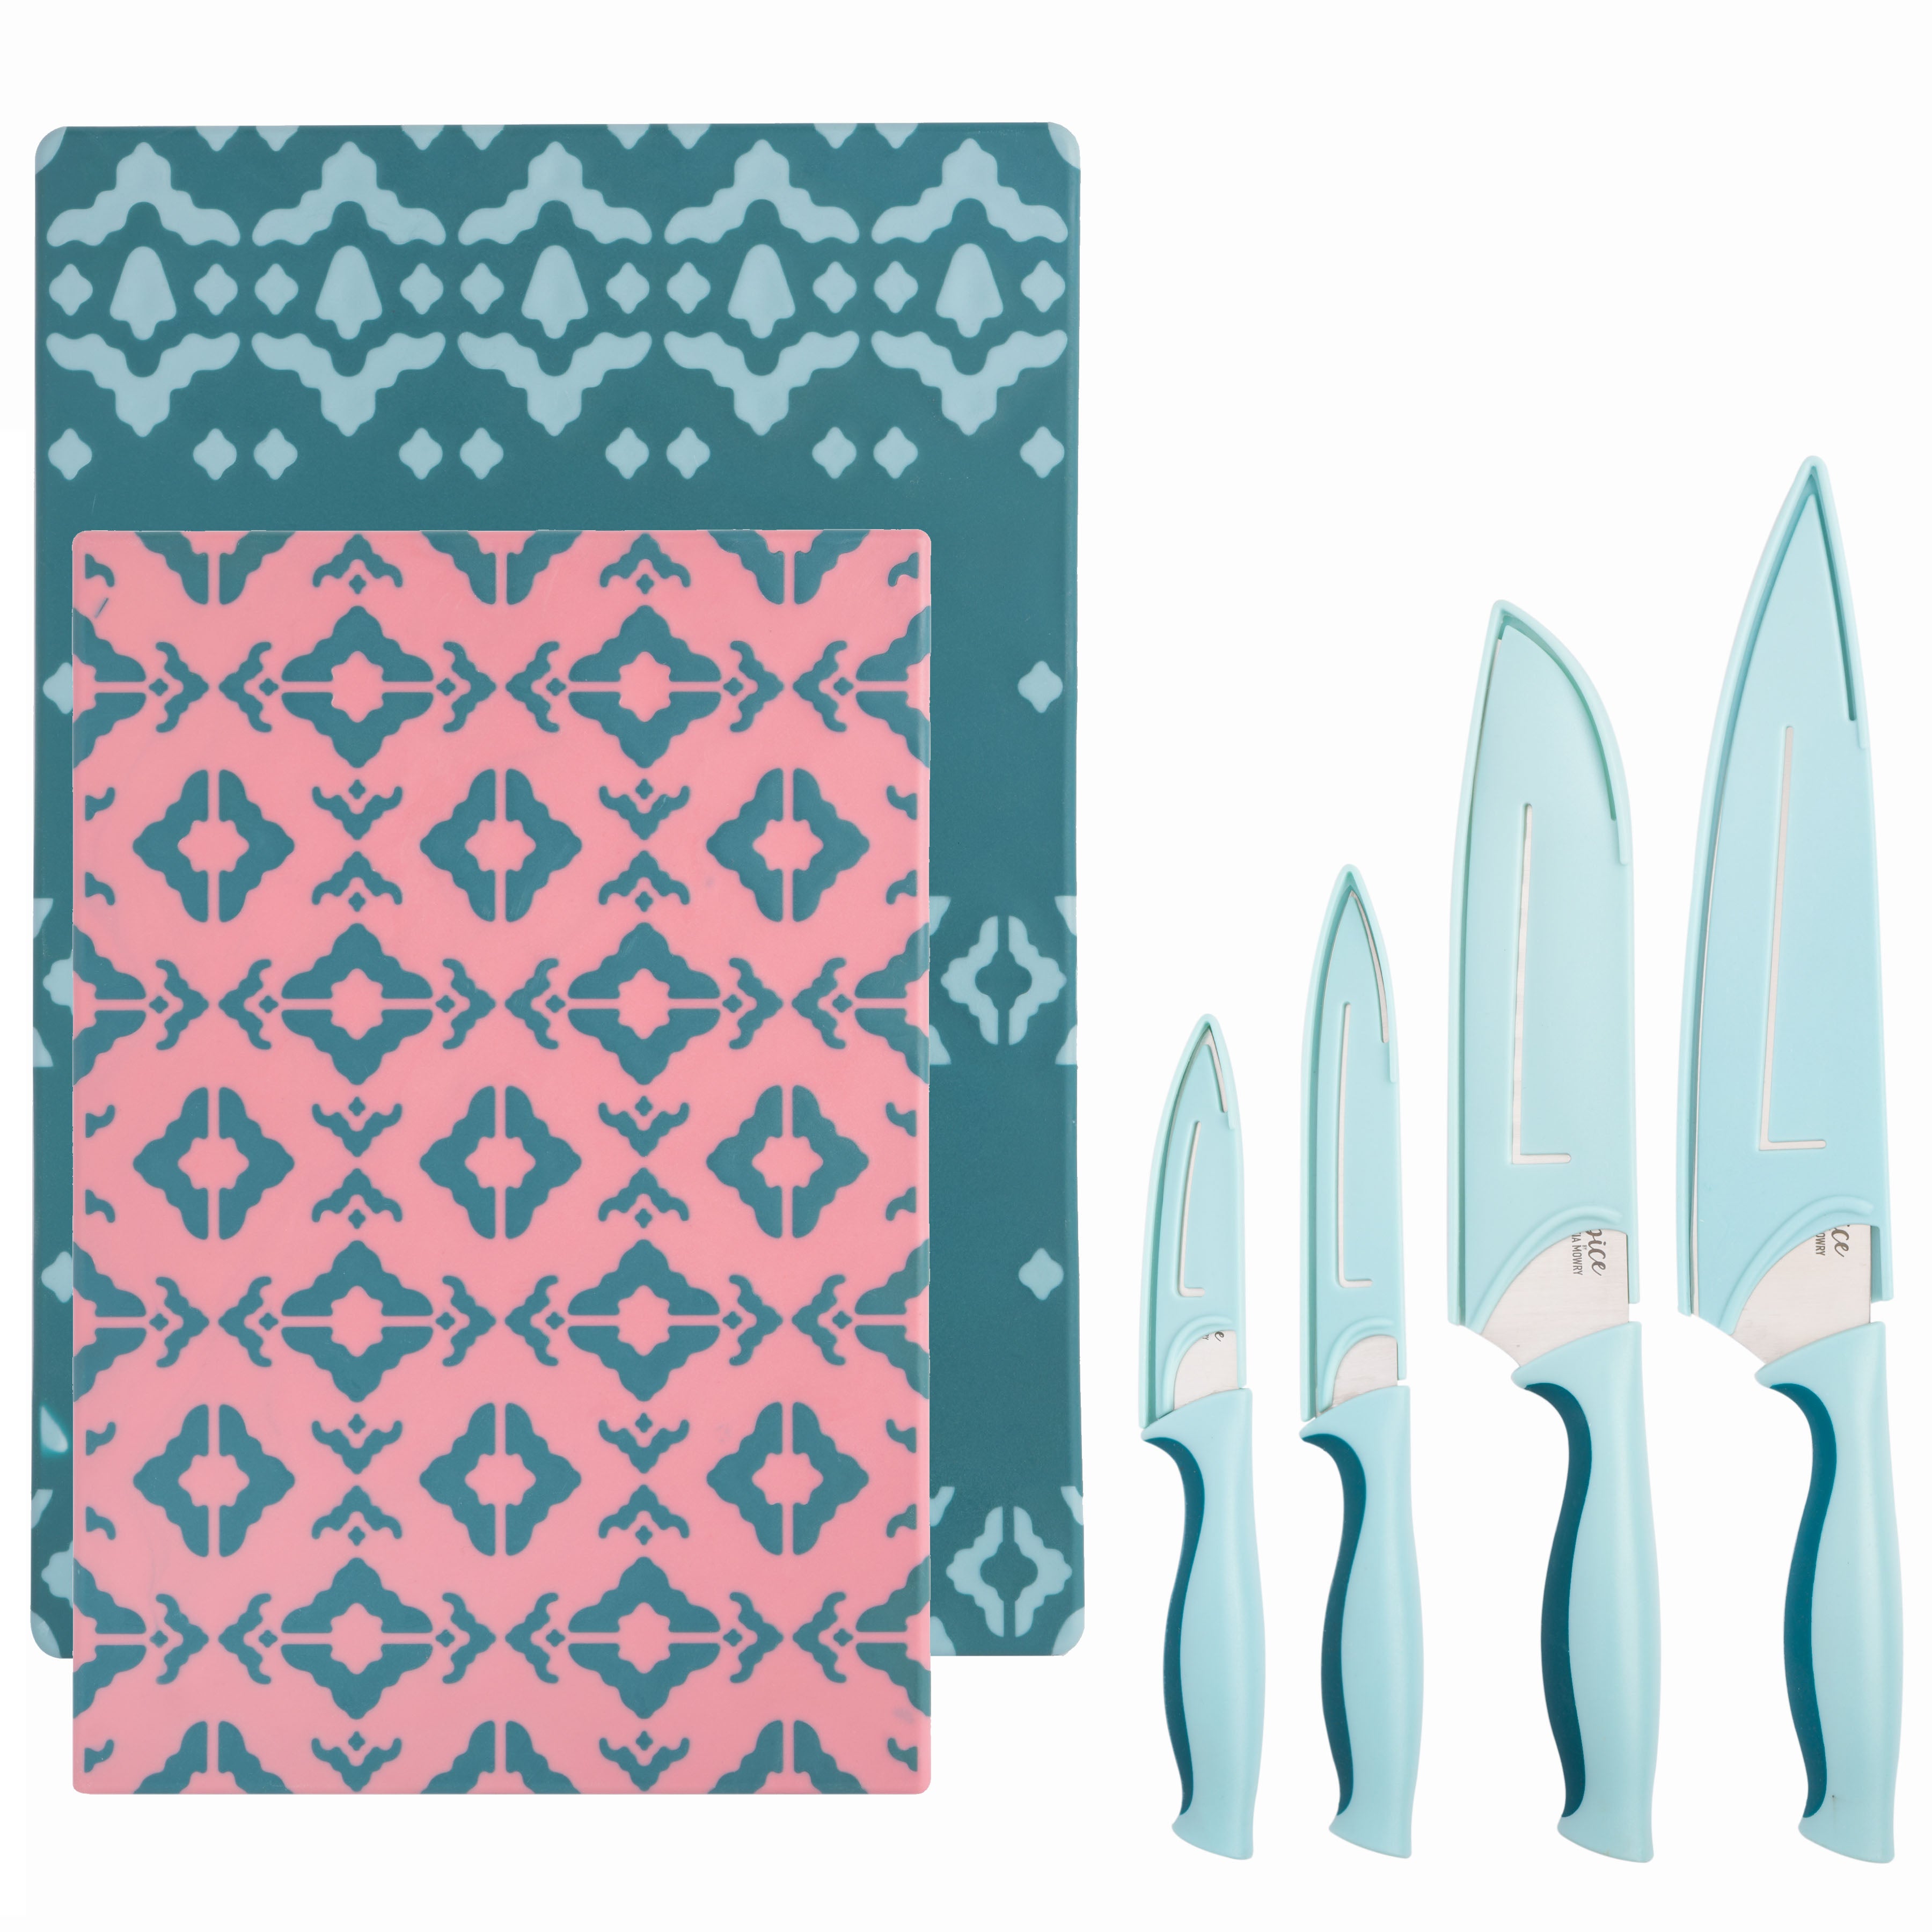 Spice by Tia Mowry 10-Piece Cutting Board and Kitchen Cutlery Set